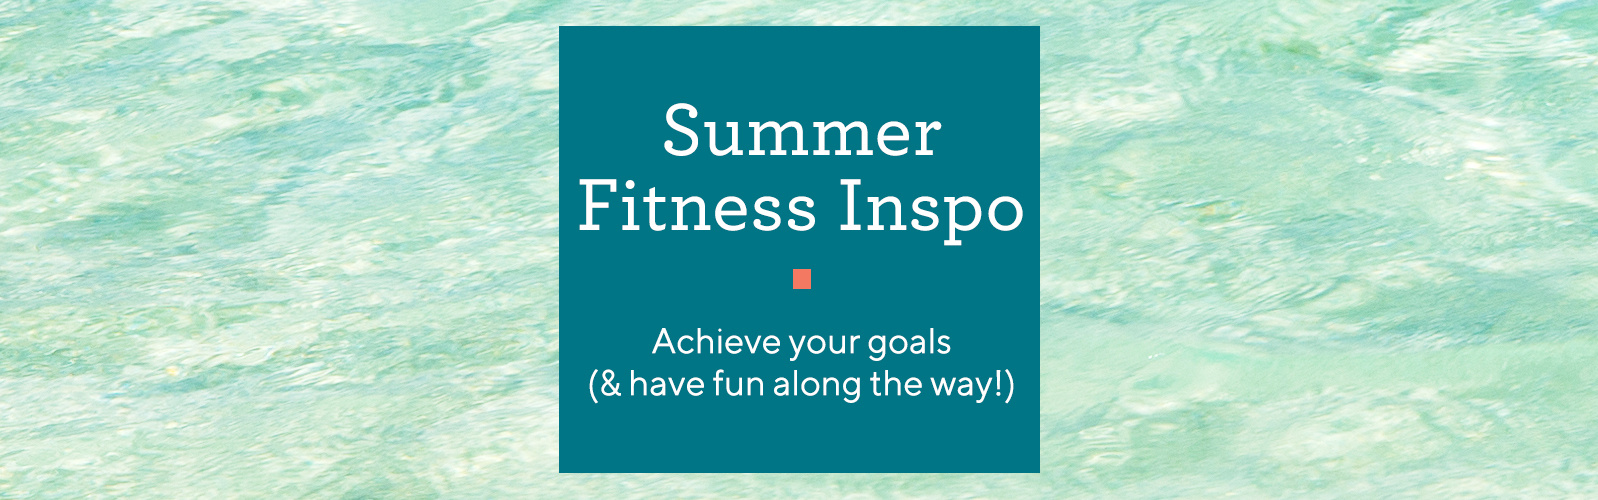 Summer Fitness Inspo  Achieve your goals (& have fun along the way!)